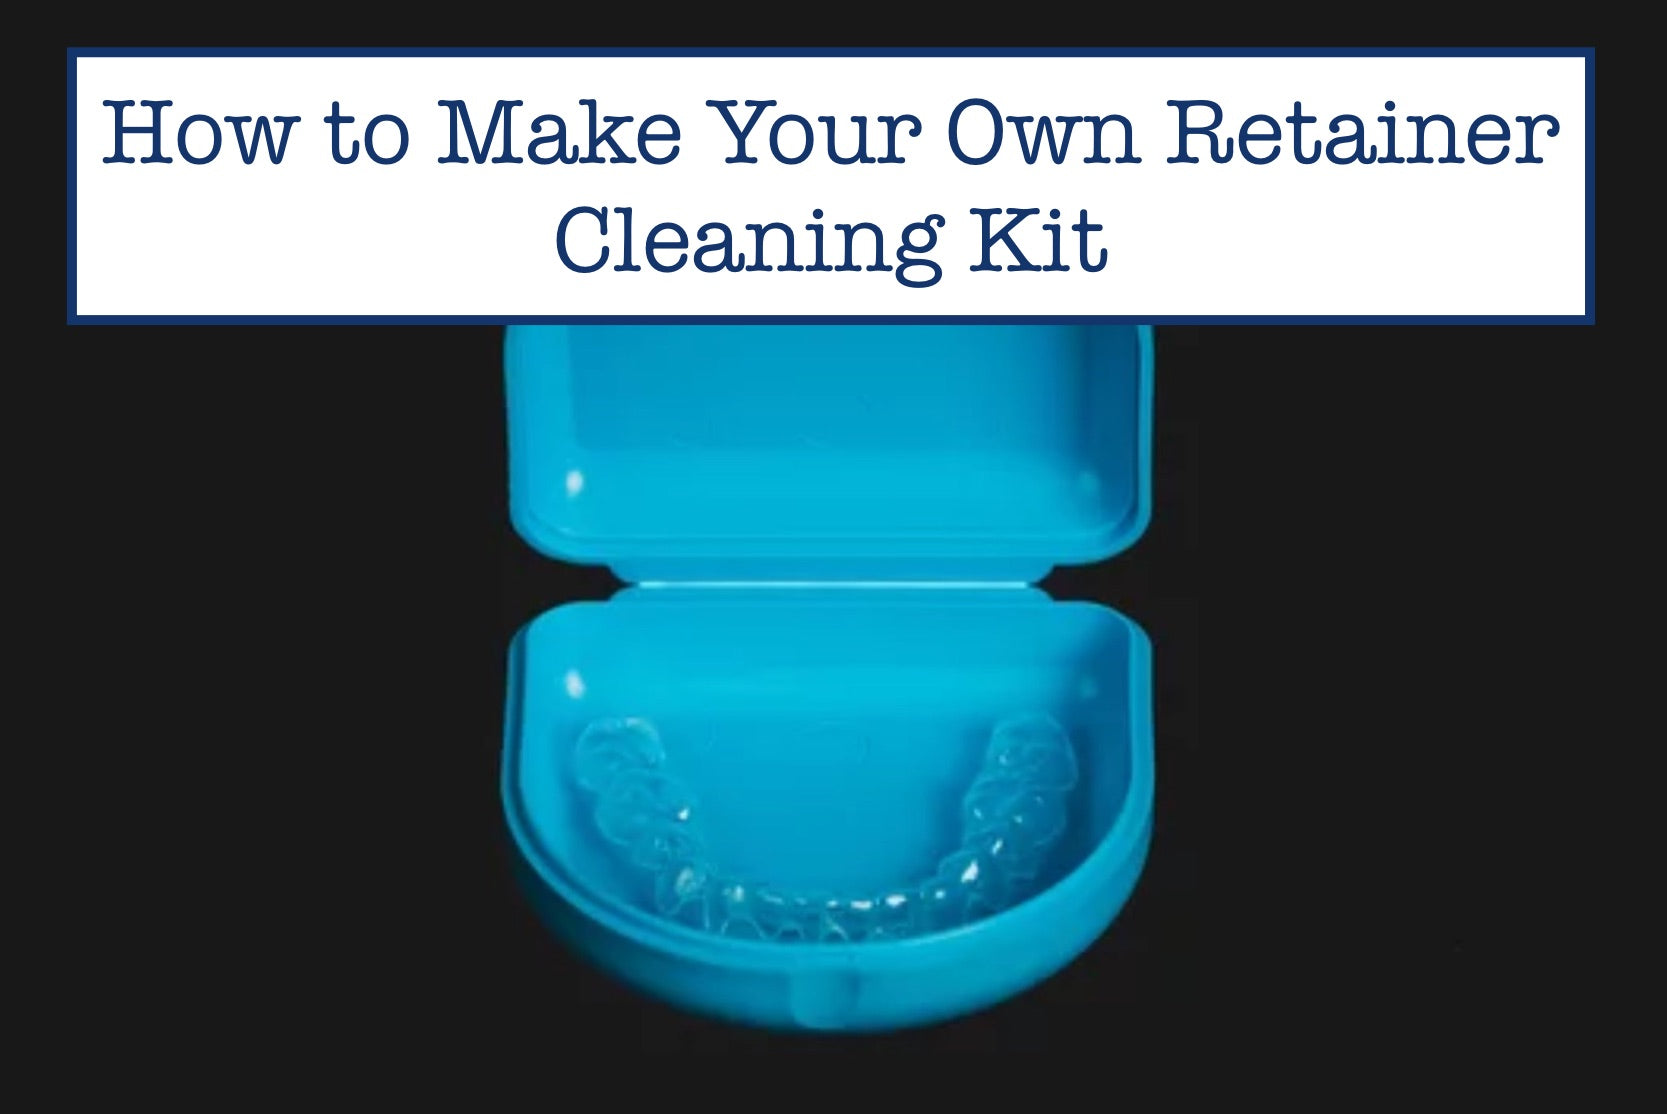 How to Make Your Own Retainer Cleaning Kit